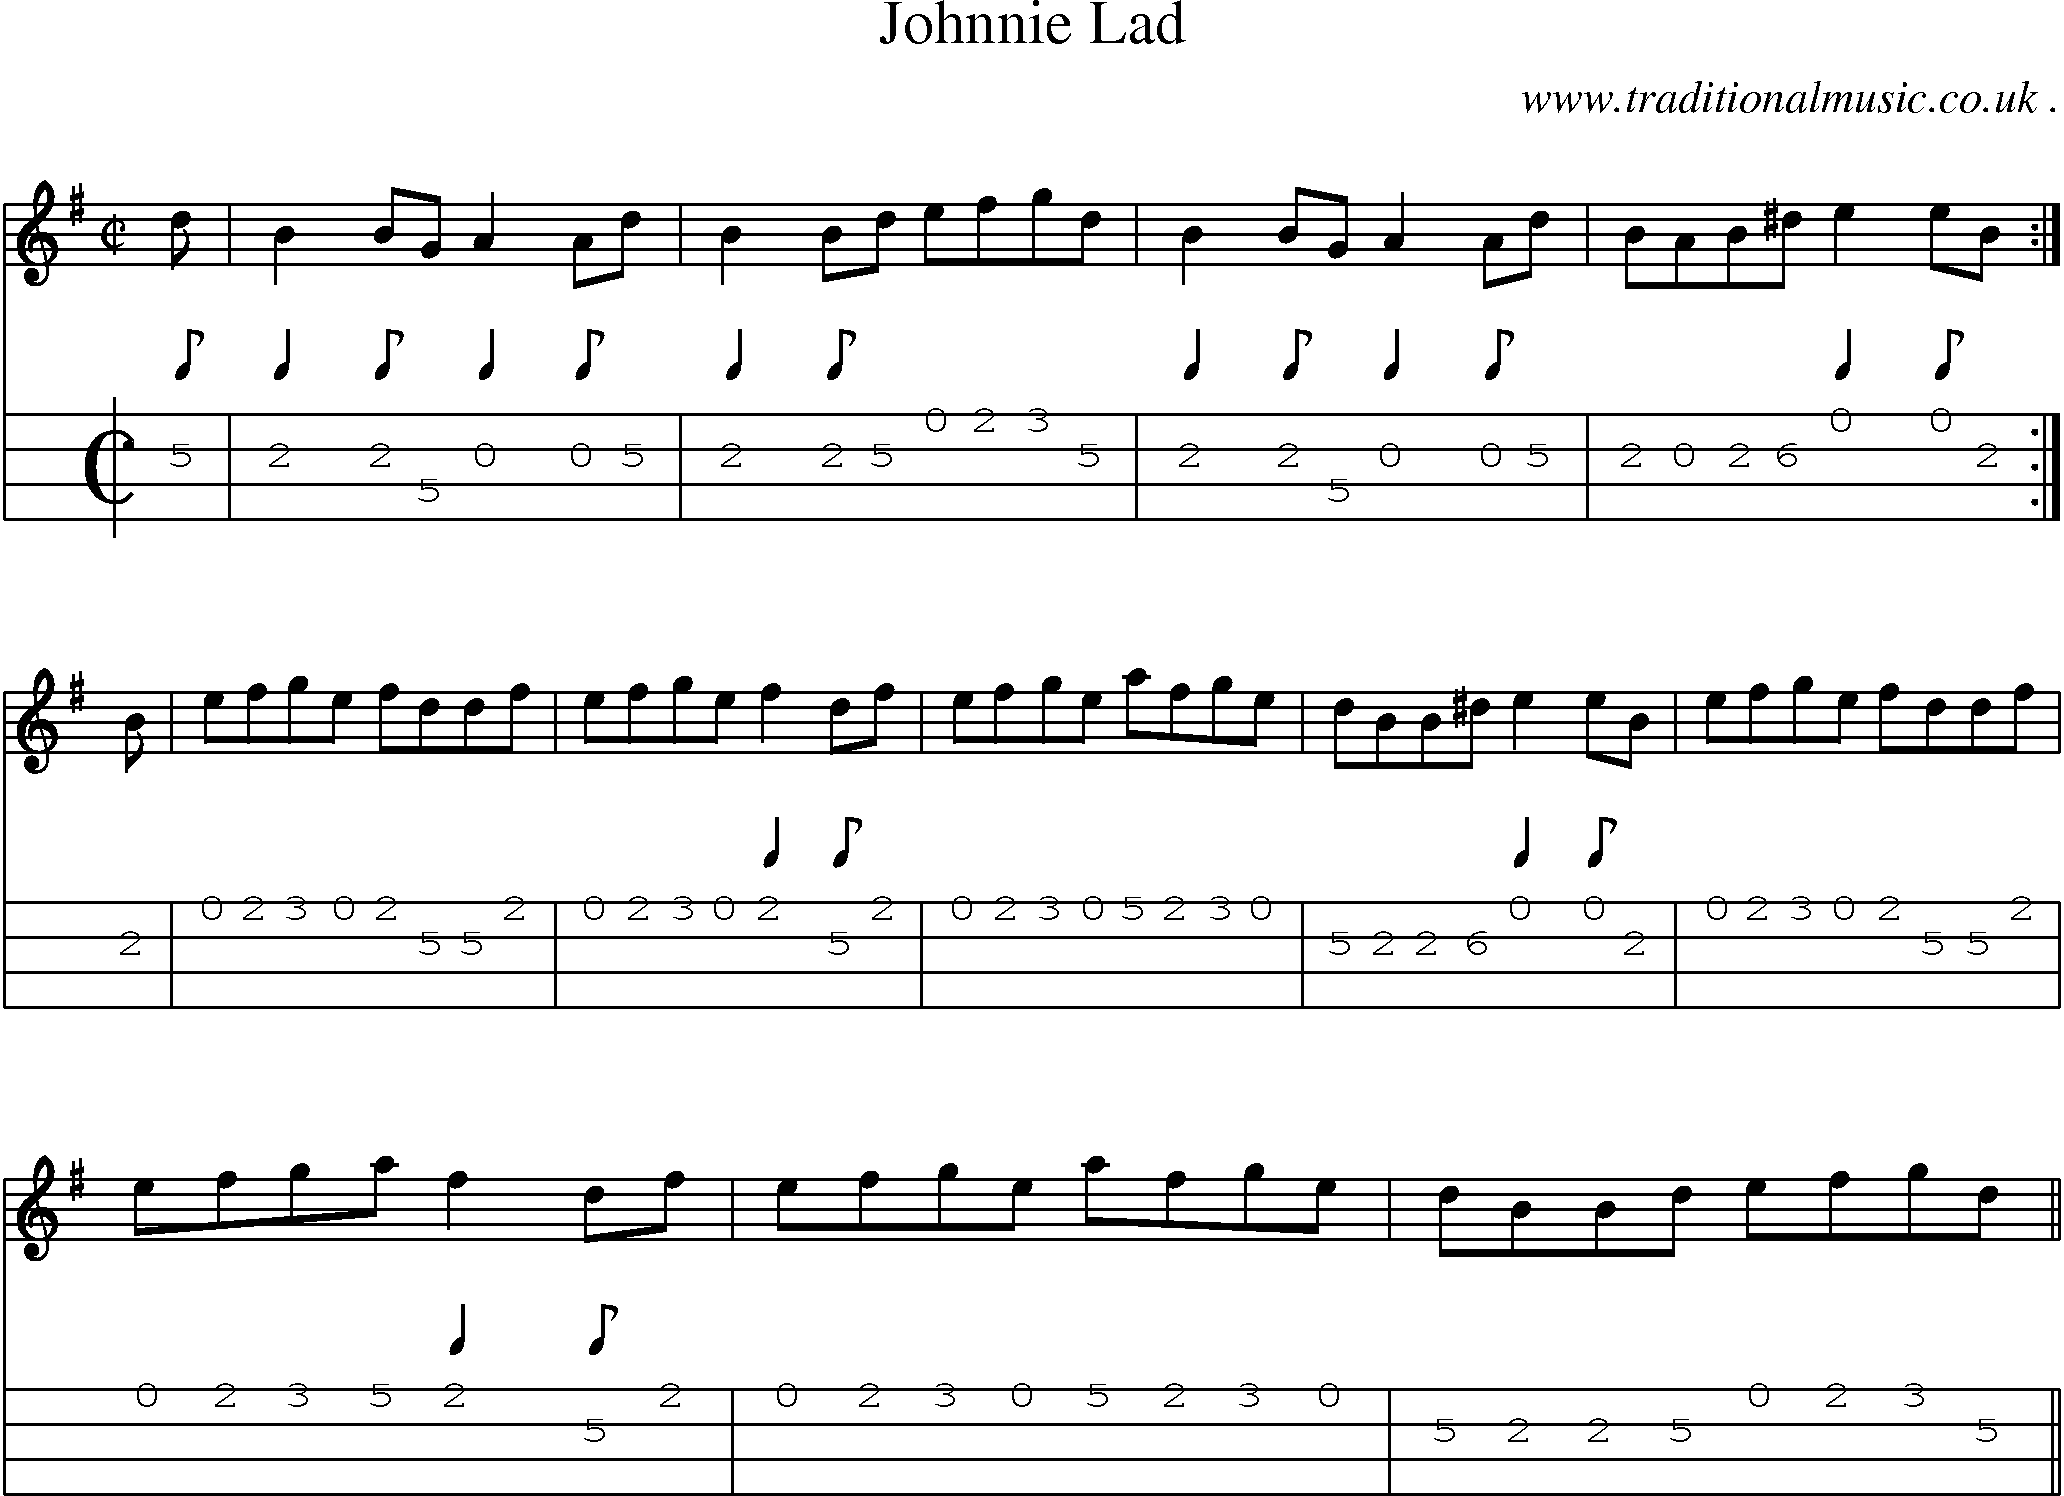 Sheet-music  score, Chords and Mandolin Tabs for Johnnie Lad